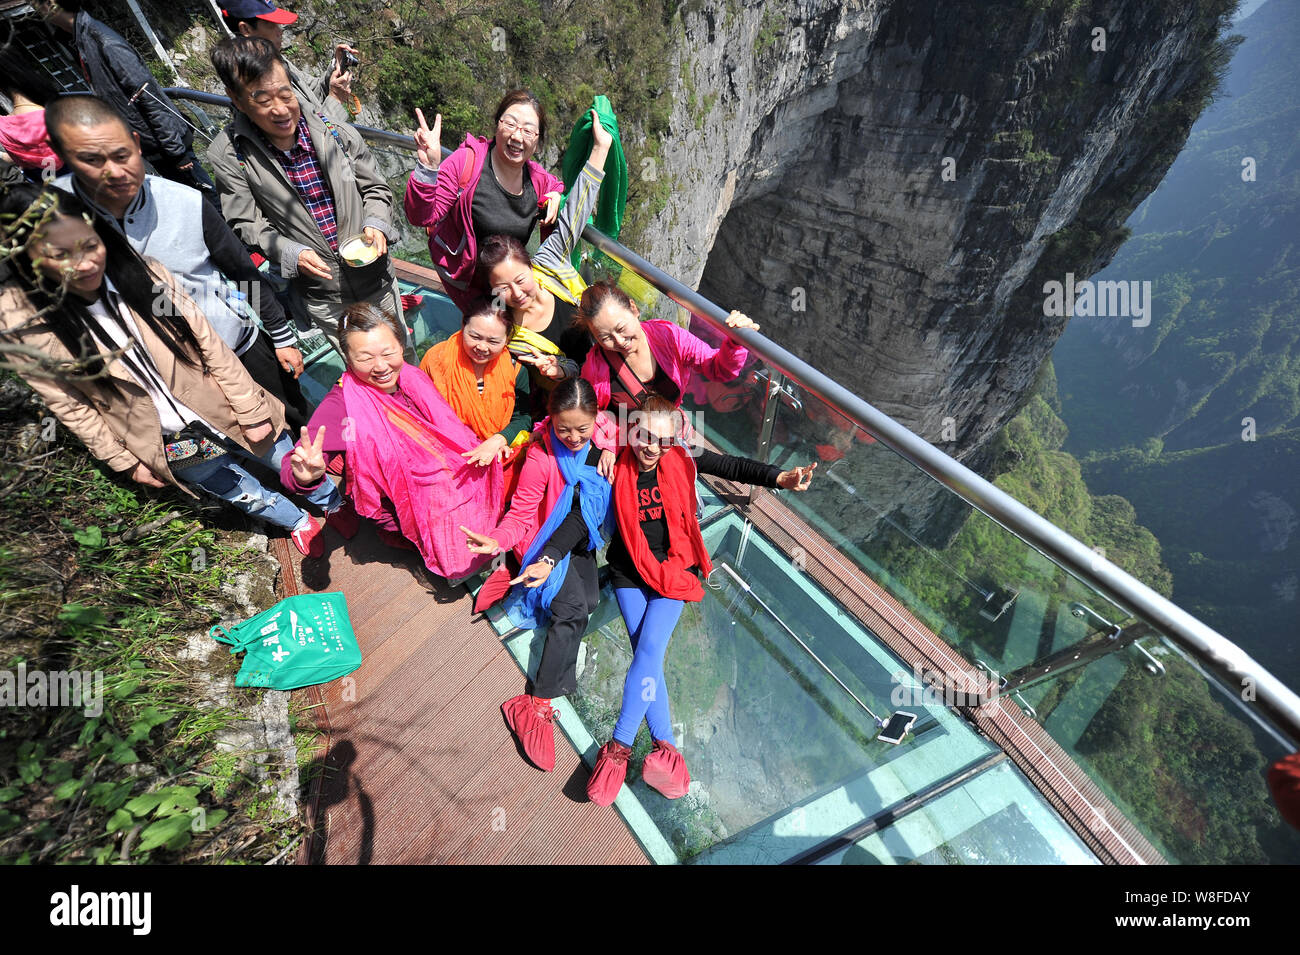 Tourists Pose For Photos On The Glass Skywalk On The Cliff Of Tianmen Mountain Or Tianmenshan Mountain In Zhangjiajie National Forest Park In Zhangj Stock Photo Alamy